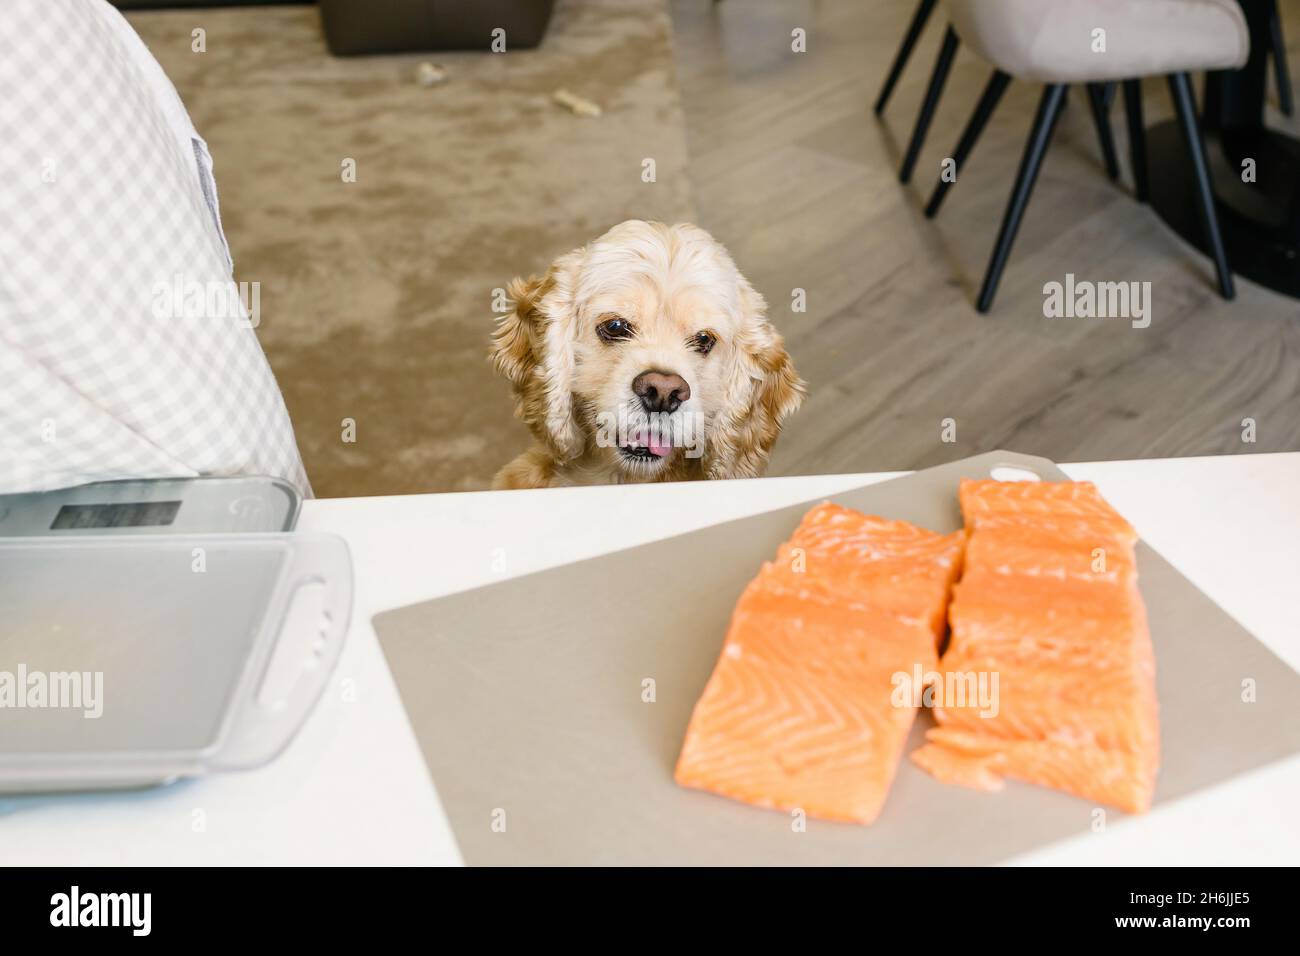 The dog stares at the delicious salmon fillet on the table in the kitchen. Stock Photo